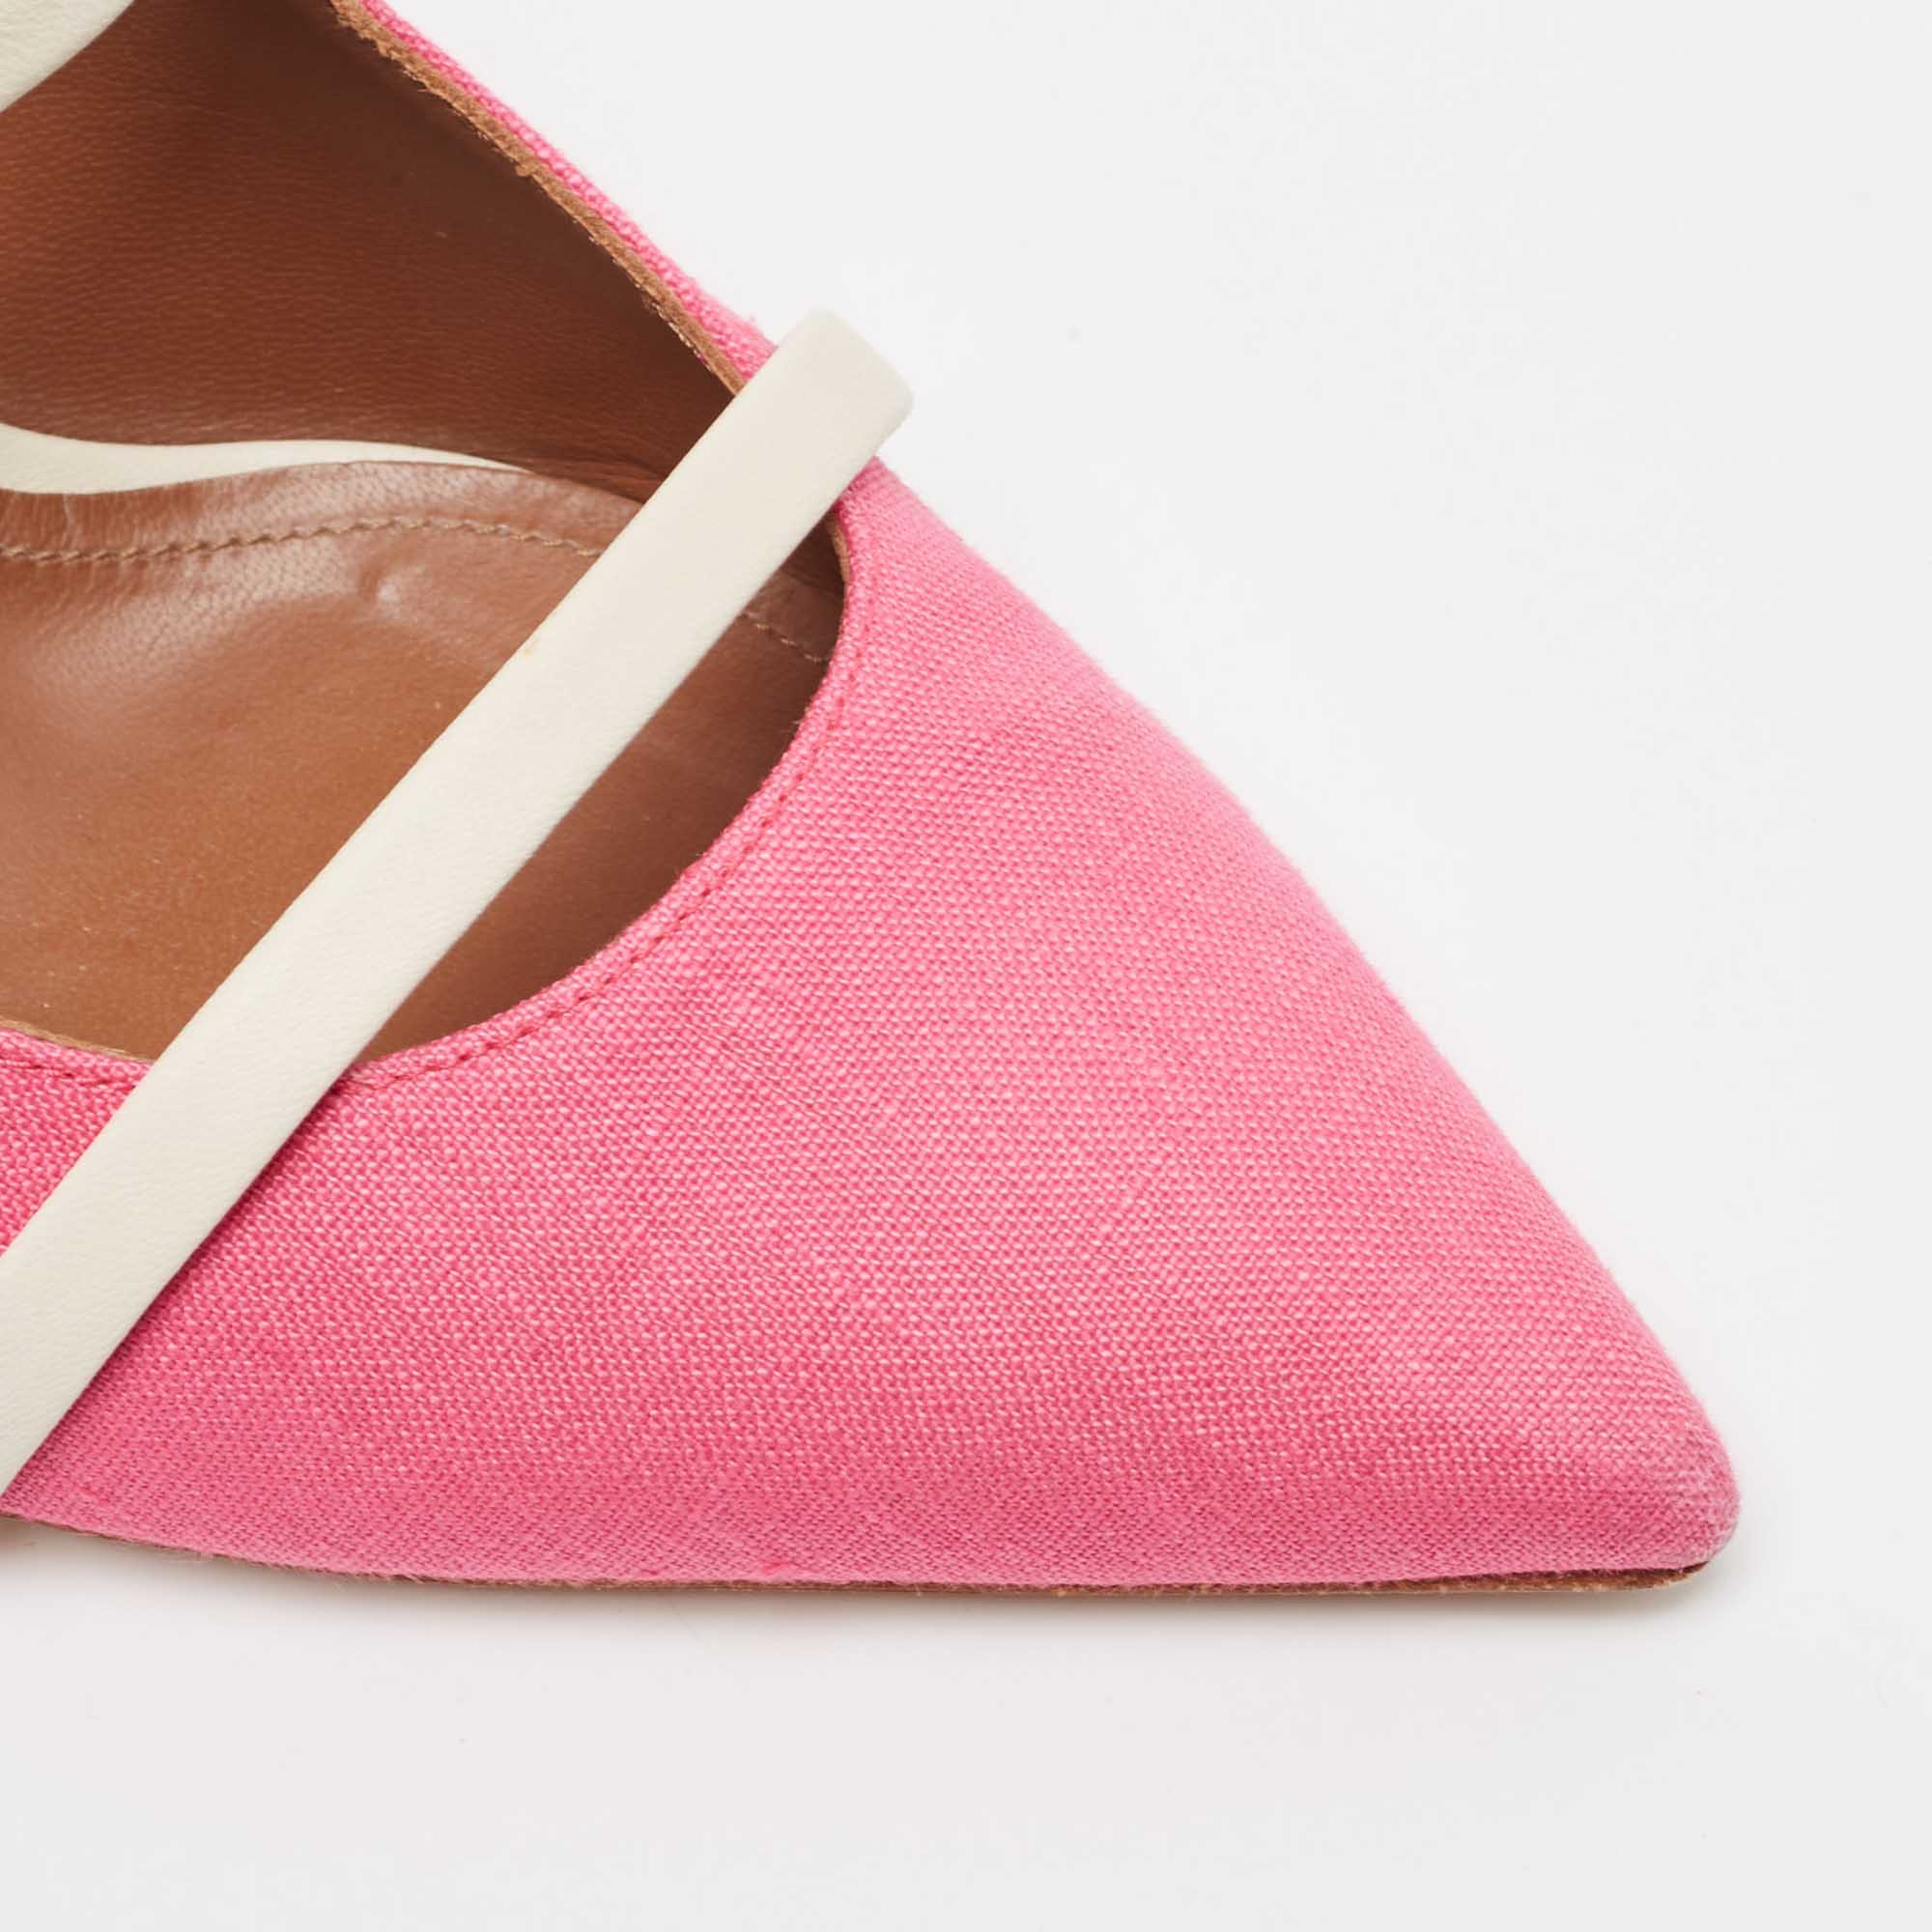 Malone Souliers Pink/White Canvas And Leather Maureen Mules Size 39.5